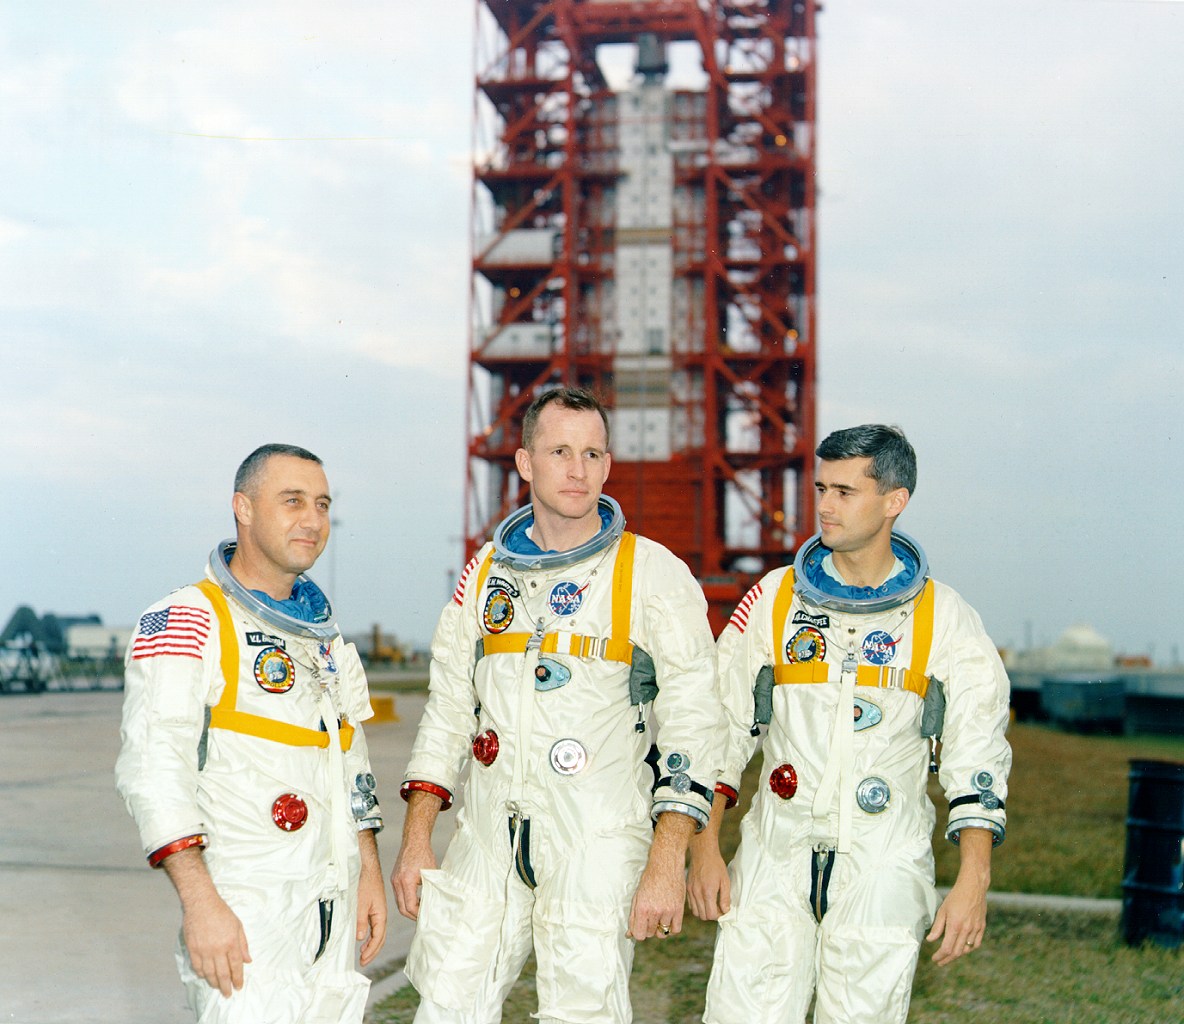 crew-of-apollo-204-died-during-a-fire.jpg